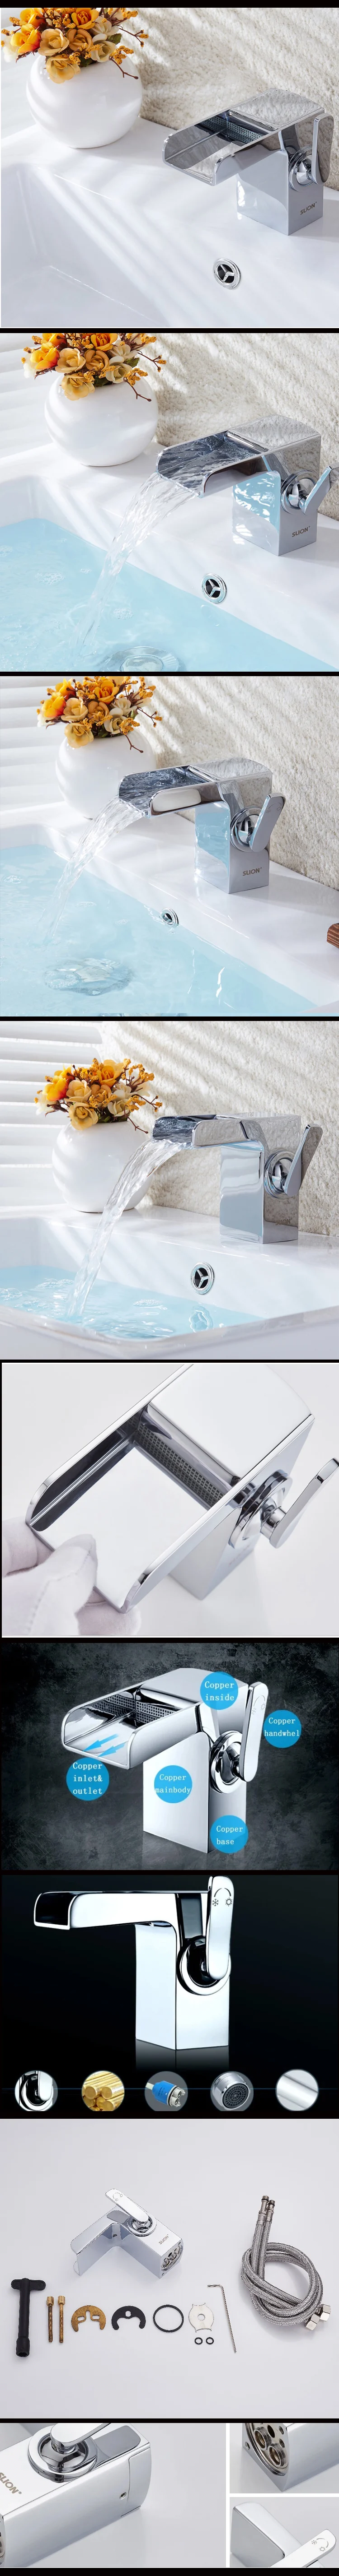 Waterfall Brass Chrome Plated Single Handle  Faucet Basin For Vessel tap Brushed Sink mixer